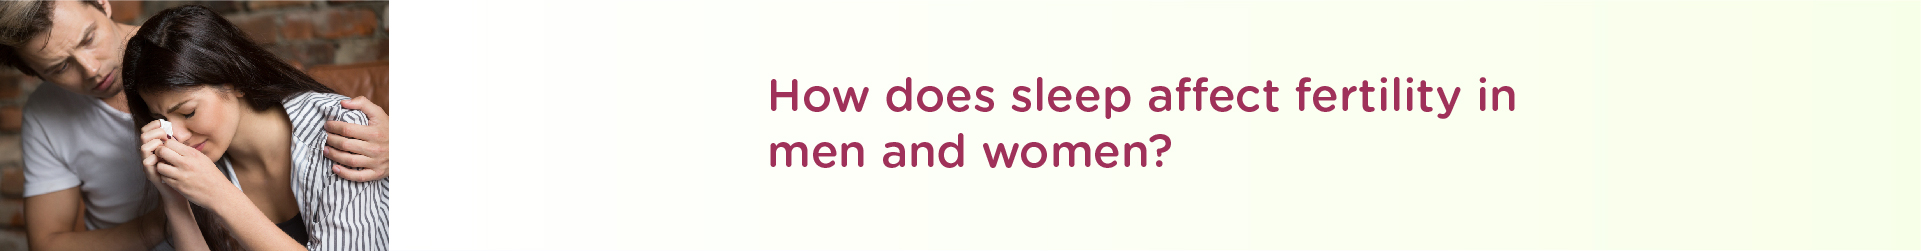 How Does Sleep Affect Fertility in Men and Women?